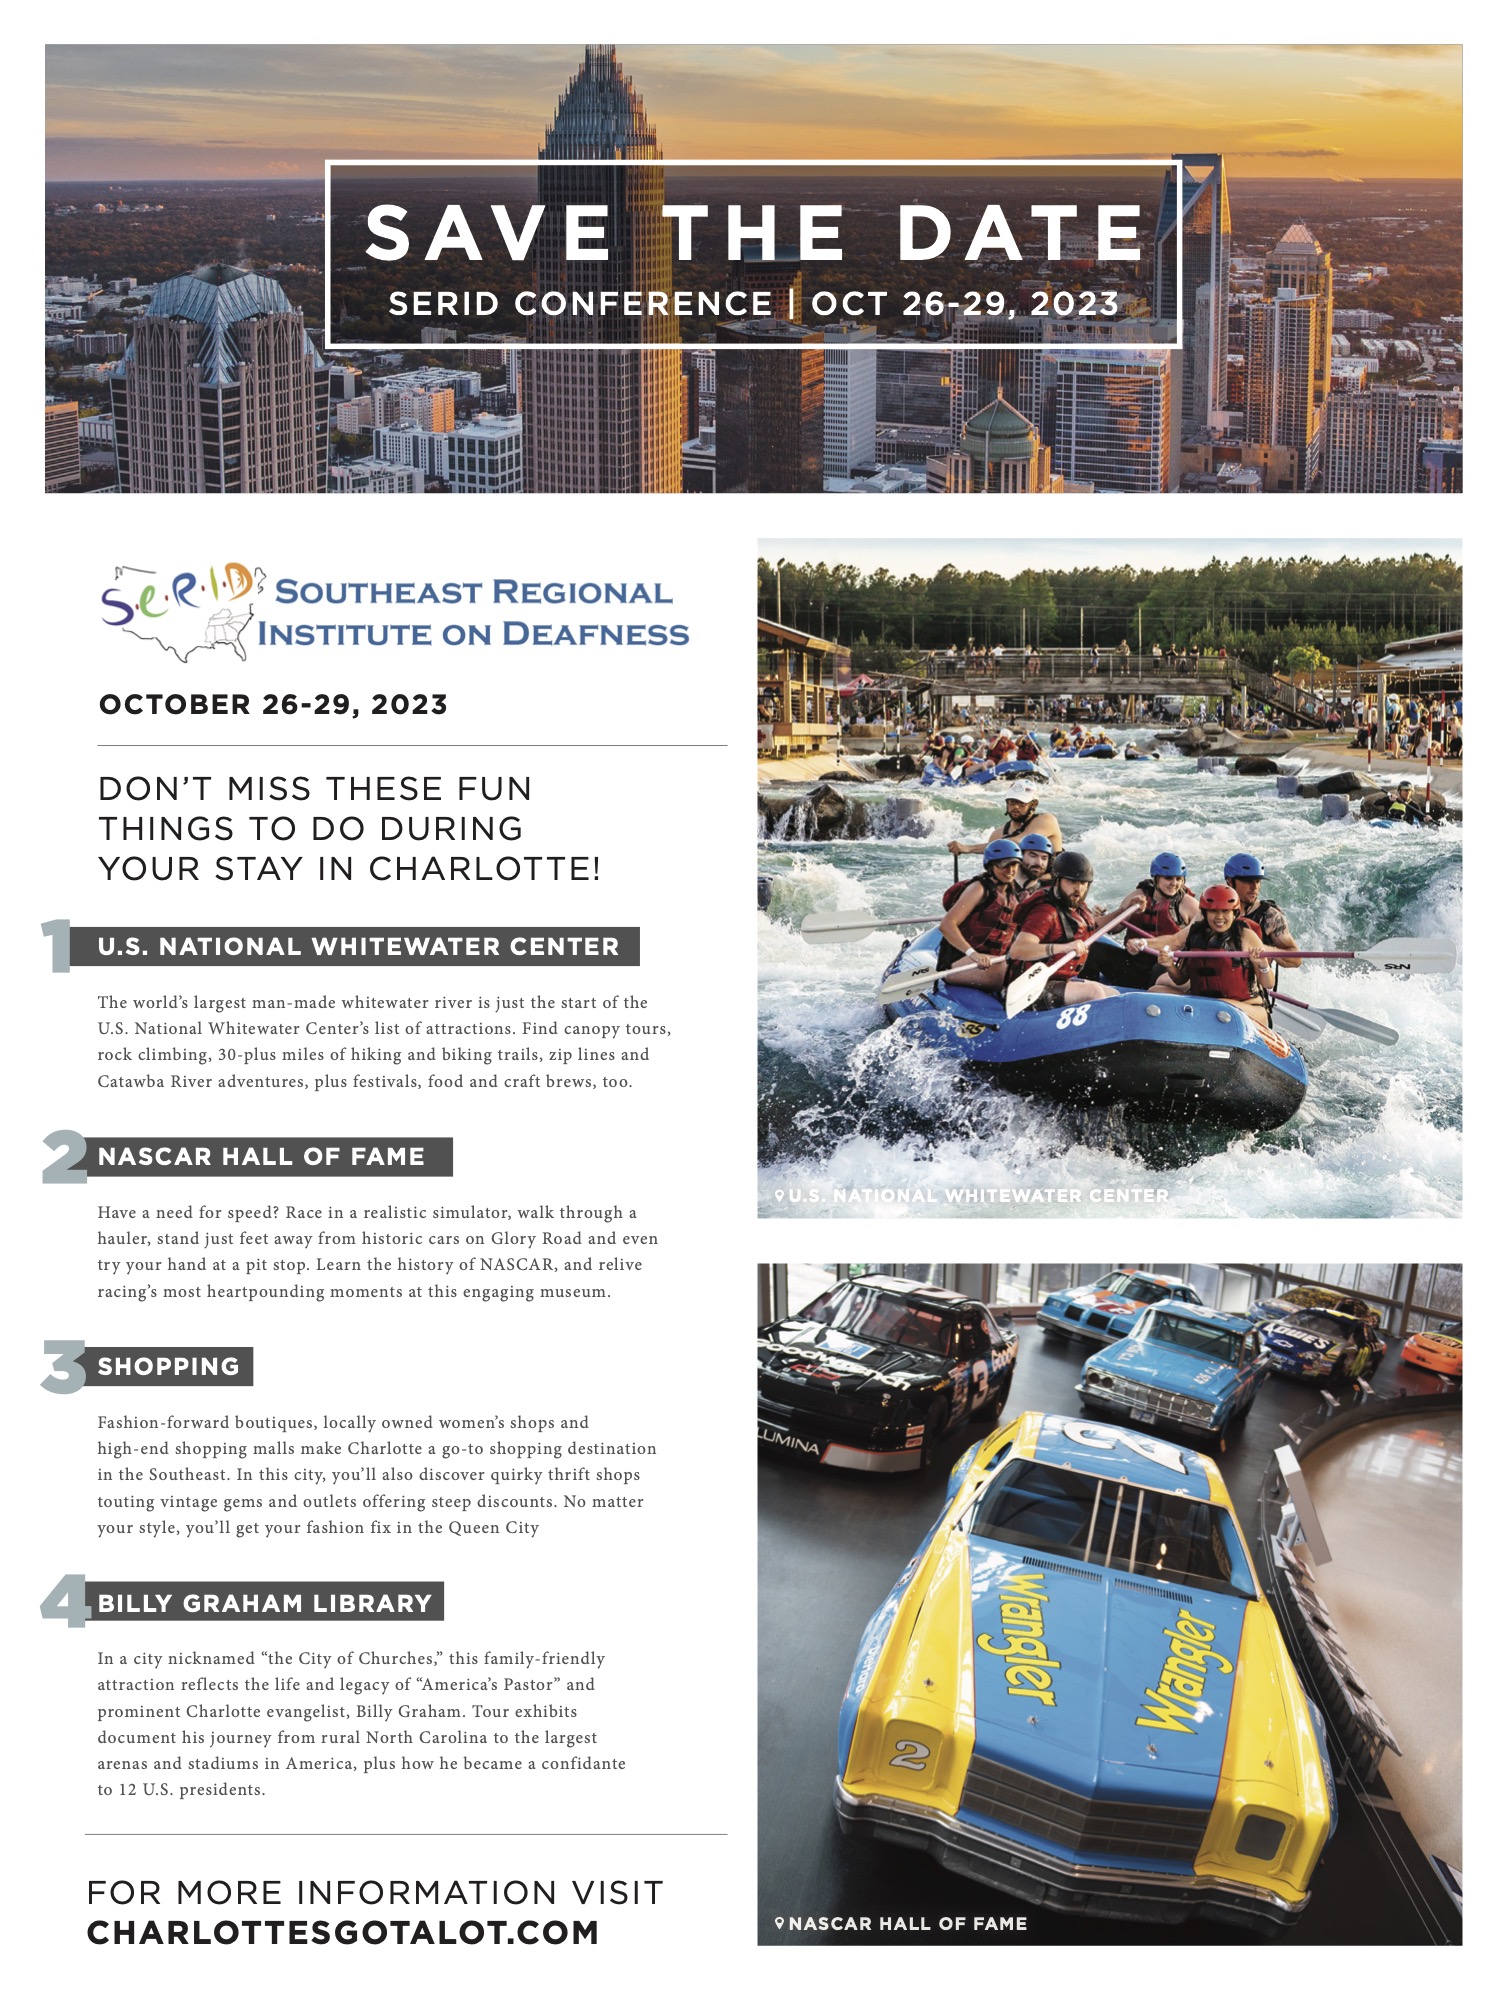 SERID 2023 Save the Date, October 23-29, 2023. Pictures of whitewater rafting and Nascar Cars from Hall of Fame.